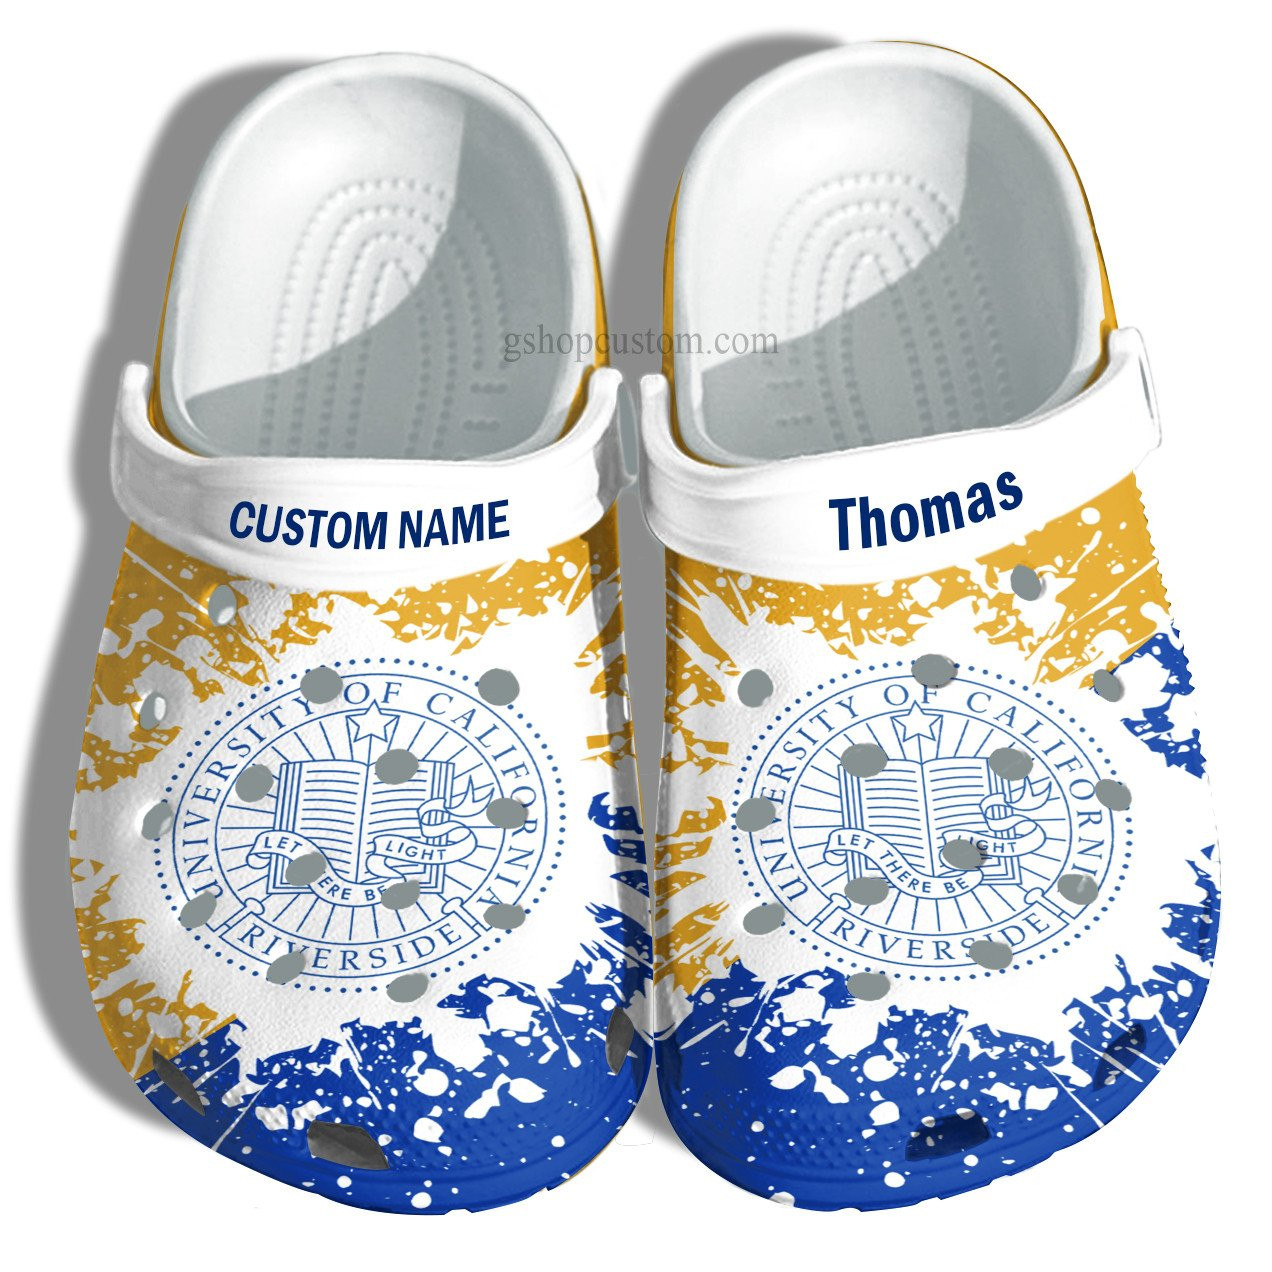 University Of California Riverside Graduation Gifts Croc Shoes Customize- Admission Gift Crocs Shoes